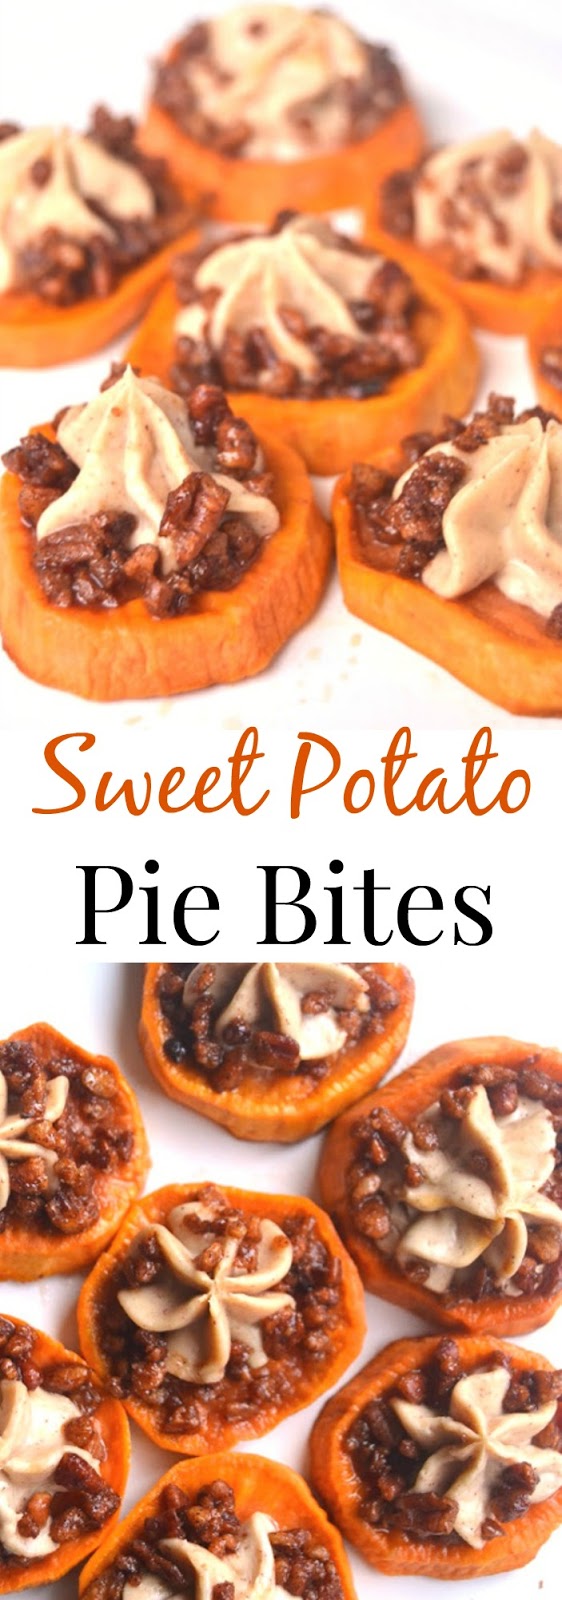 These Sweet Potato Pie Bites are perfect for dessert or part of a holiday meal. Roasted maple sweet potatoes with cinnamon cream cheese and maple pecans make this dish mouth-watering! www.nutritionistreviews.com